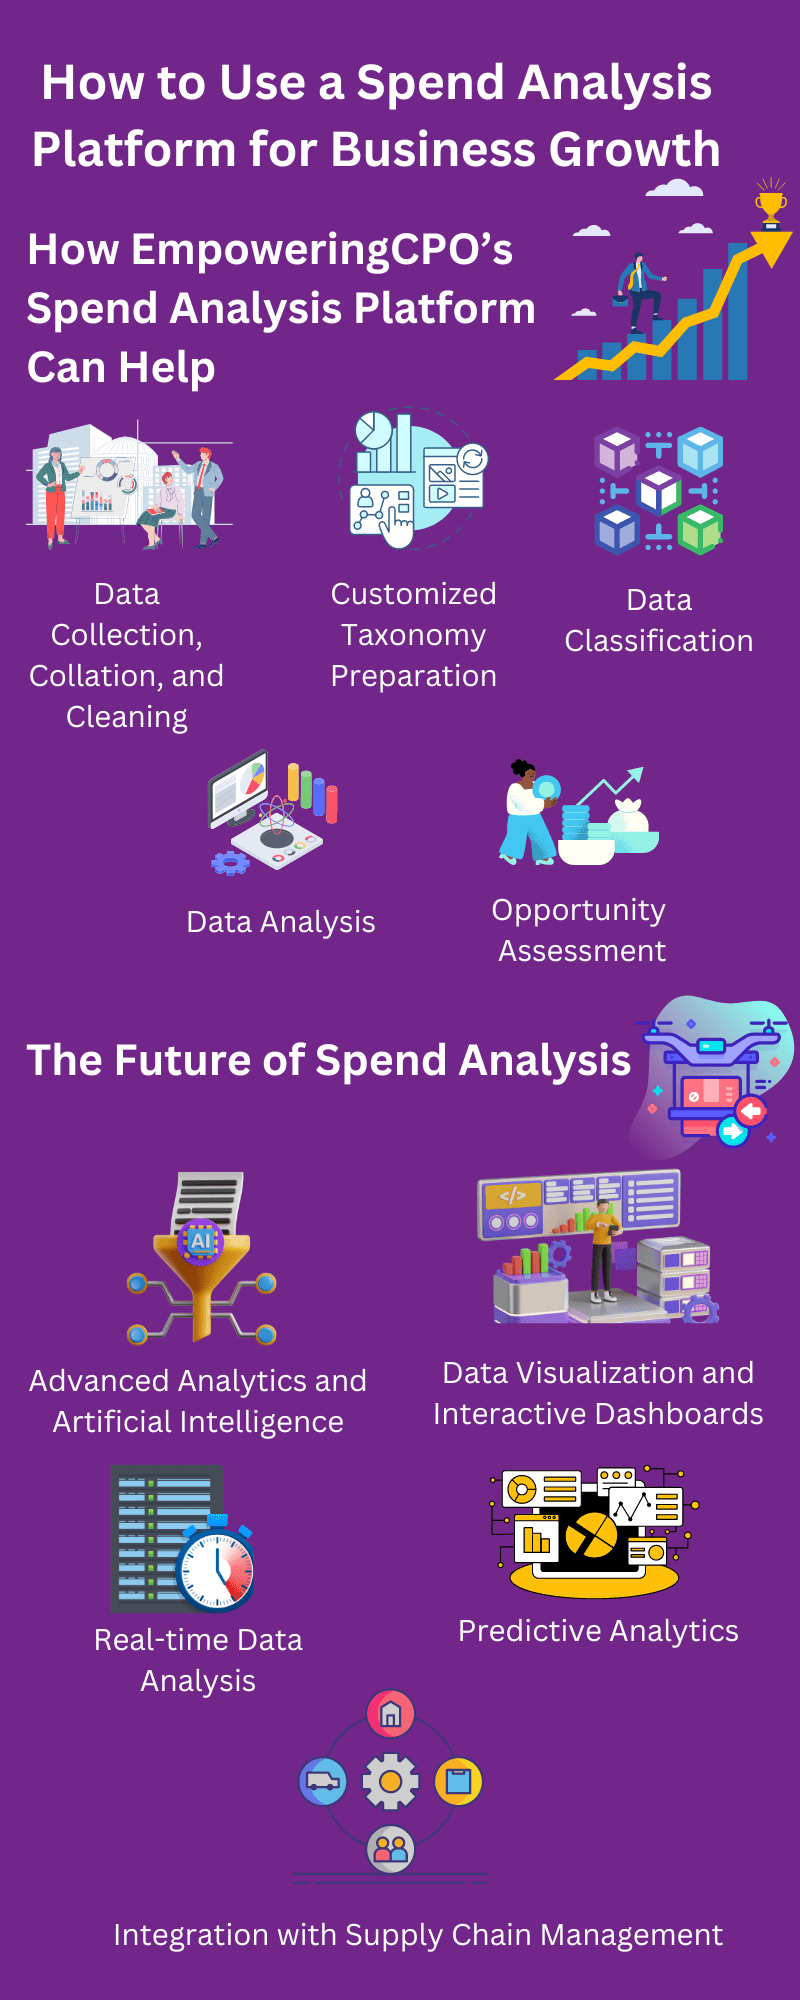 An infographic titled 'How to Use a Spend Analysis Platform for Business Growth', highlighting the features of EmpoweringCPO’s Spend Analysis Platform and discussing the future trends in spend analysis, including advanced analytics, AI, data visualization, and integration with supply chain management.